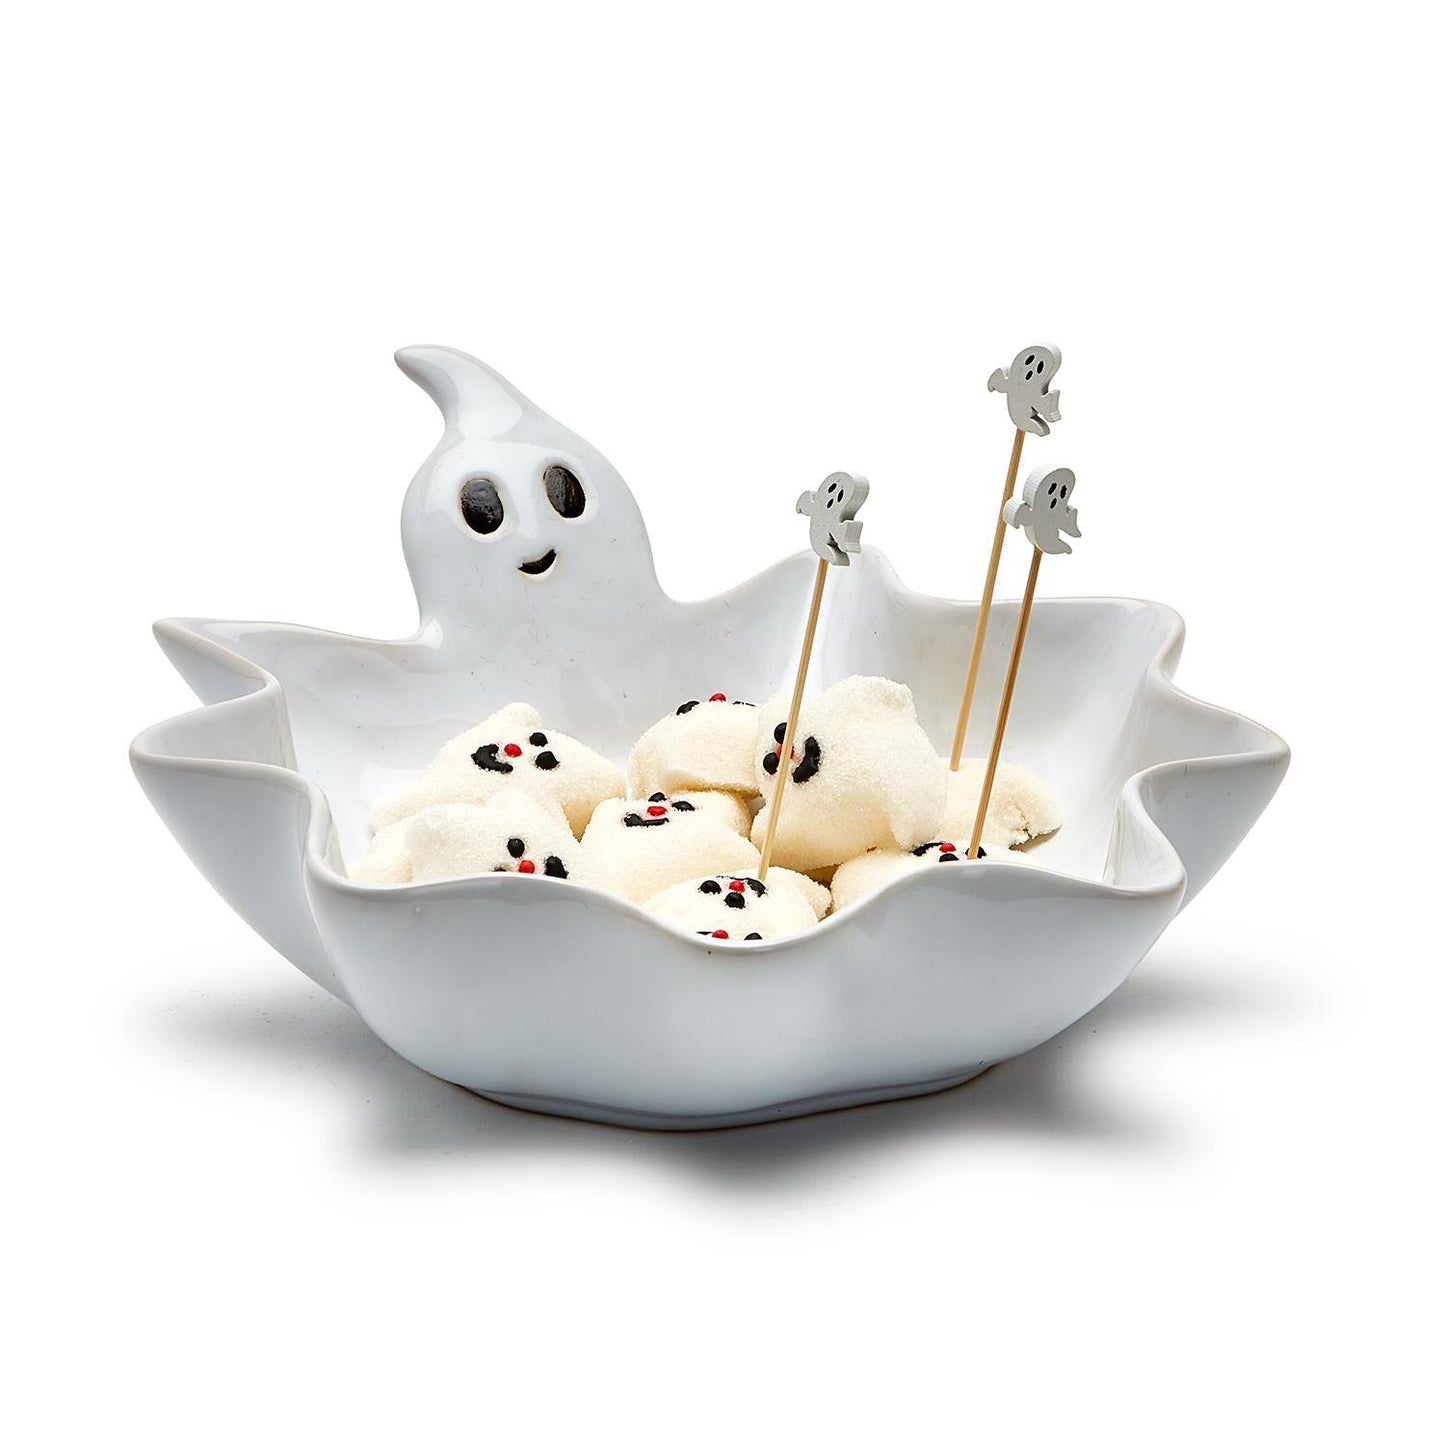 Two's Company Spooktacular Ghost Bowl with 20 Ghost Picks